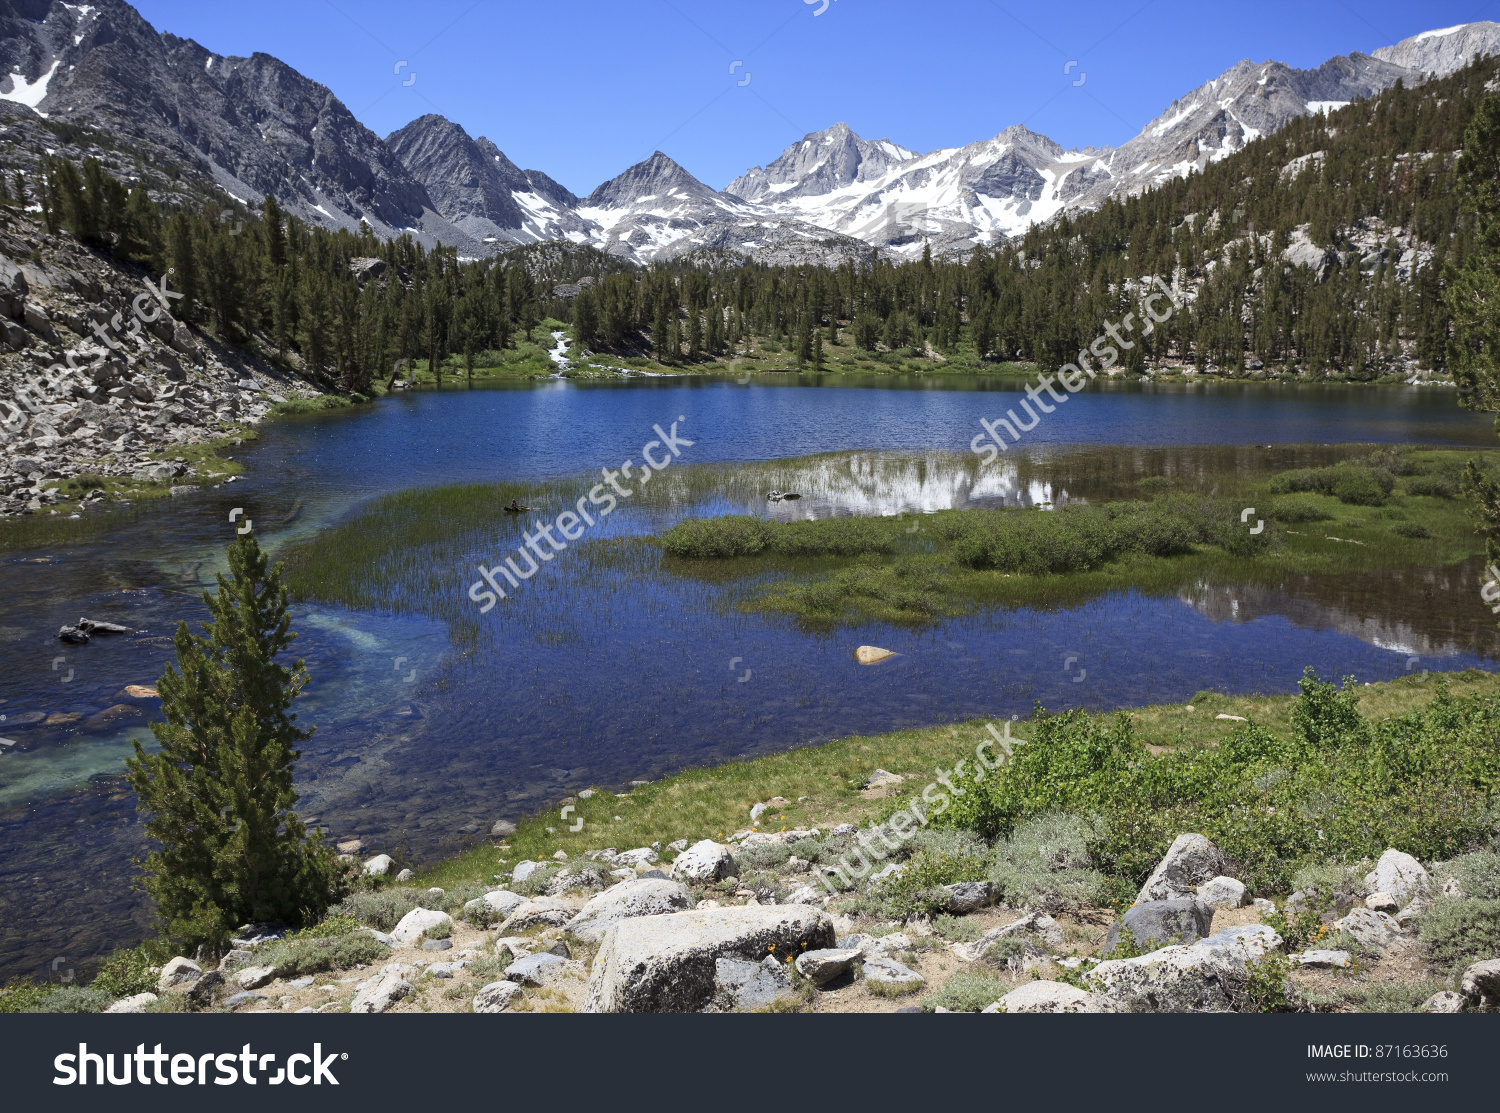 Sierra Nevada Mountains clipart #17, Download drawings